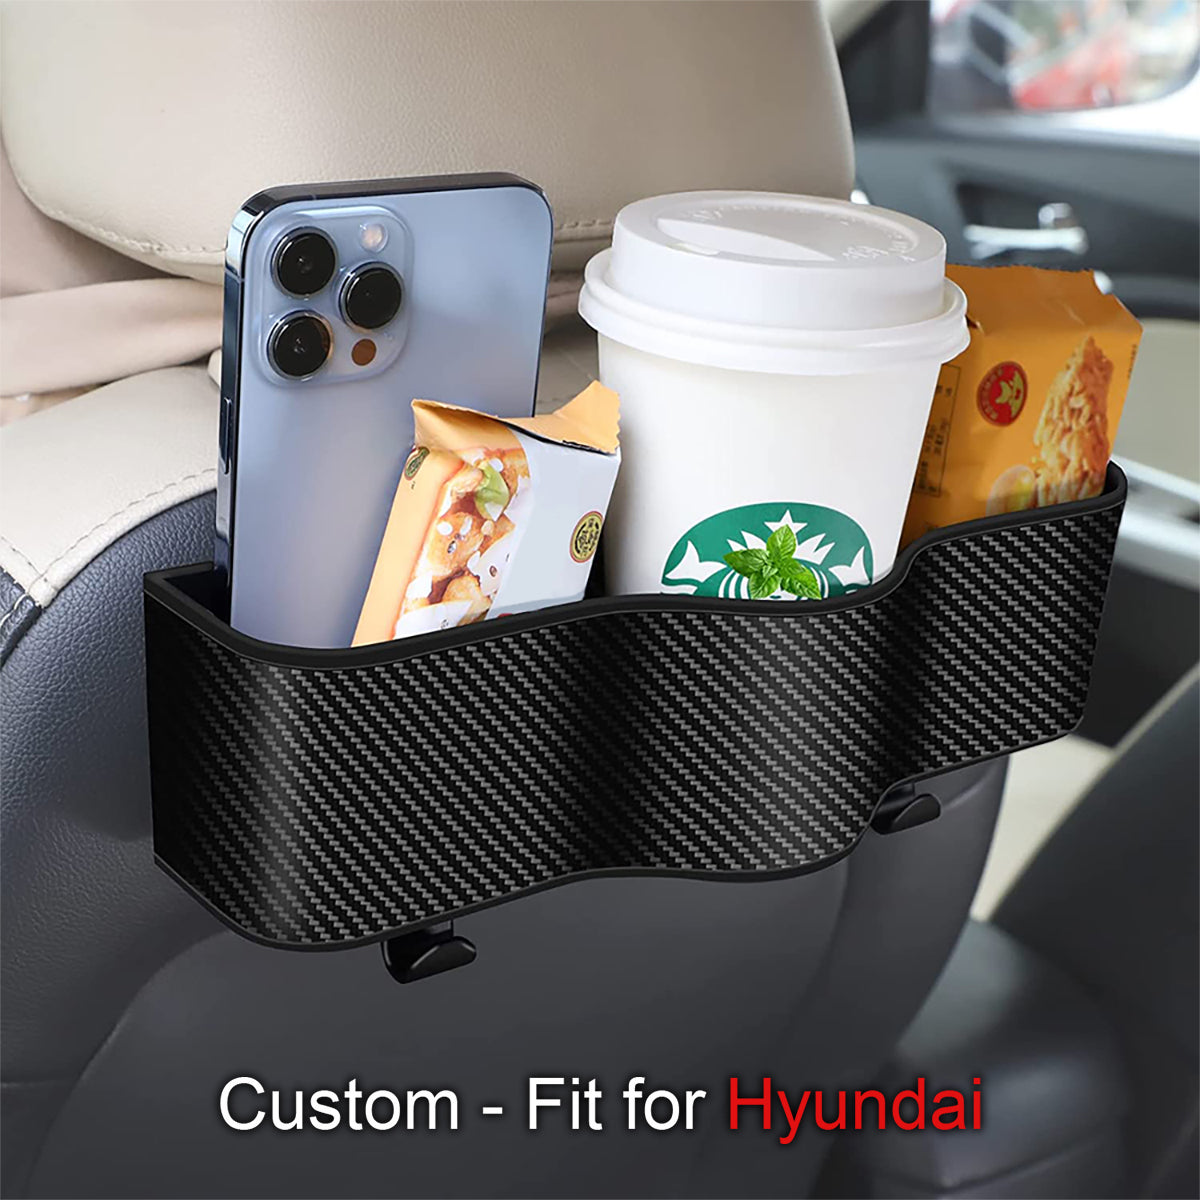 Car Headrest Backseat Organizer with Cup Holders, Custom-Fit For Car, Seat Back Organizer Perfect for Eating in Your Car, Back Seat Organizer for Kids DLHY242